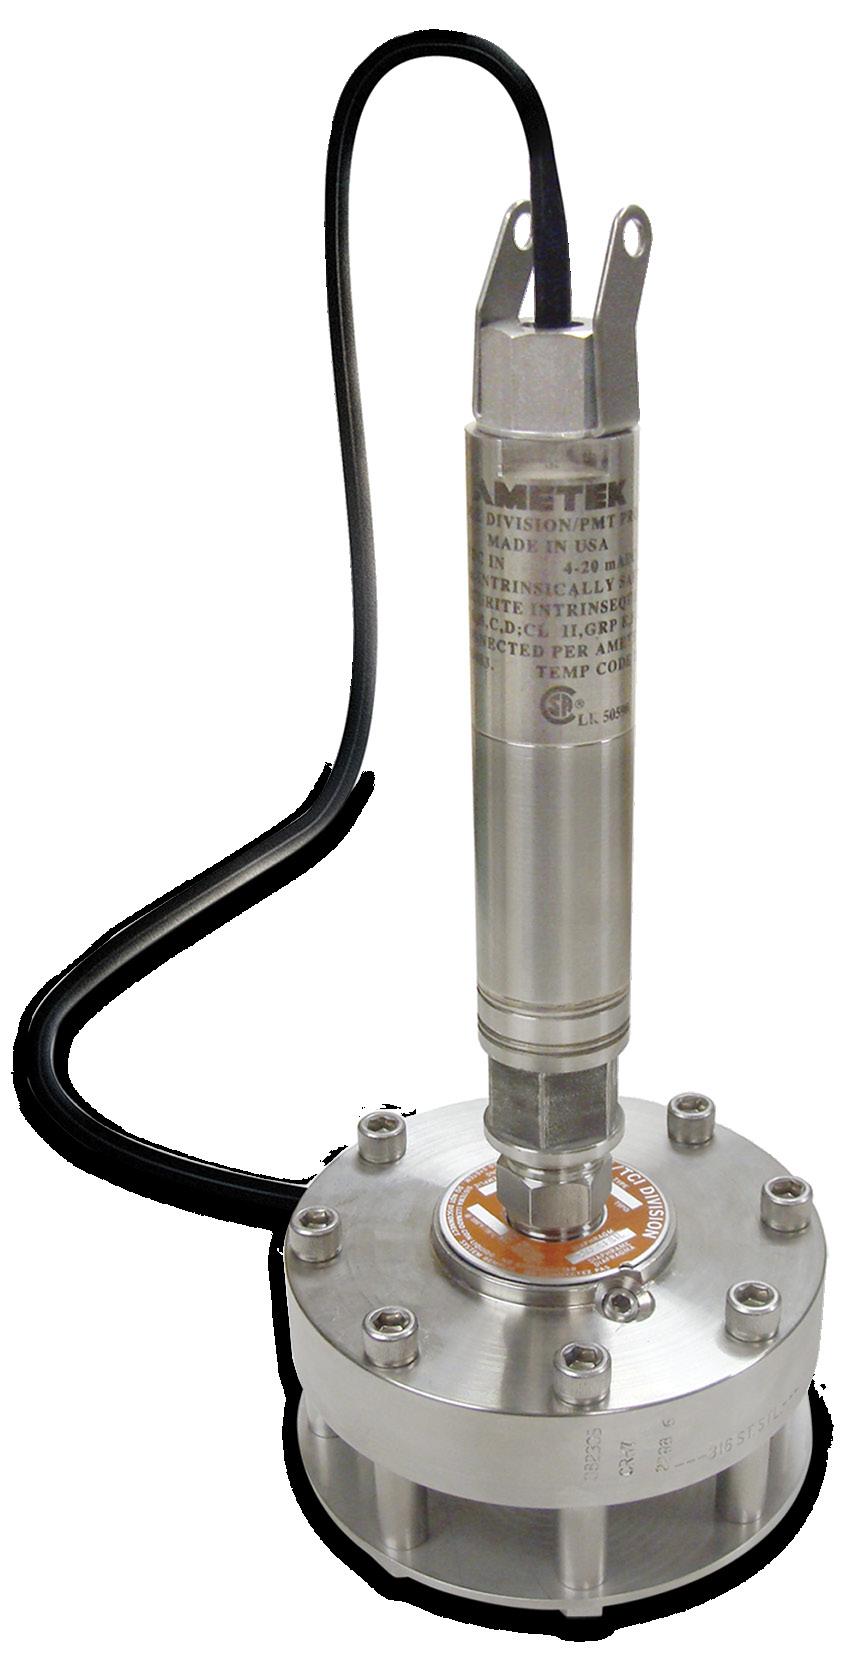 EPMP - 1 DESCRIPTION The Model 675 is specifically designed for slurry and highly viscous applications where clogging of the sensor area is common. The Model 675 uses a 3.